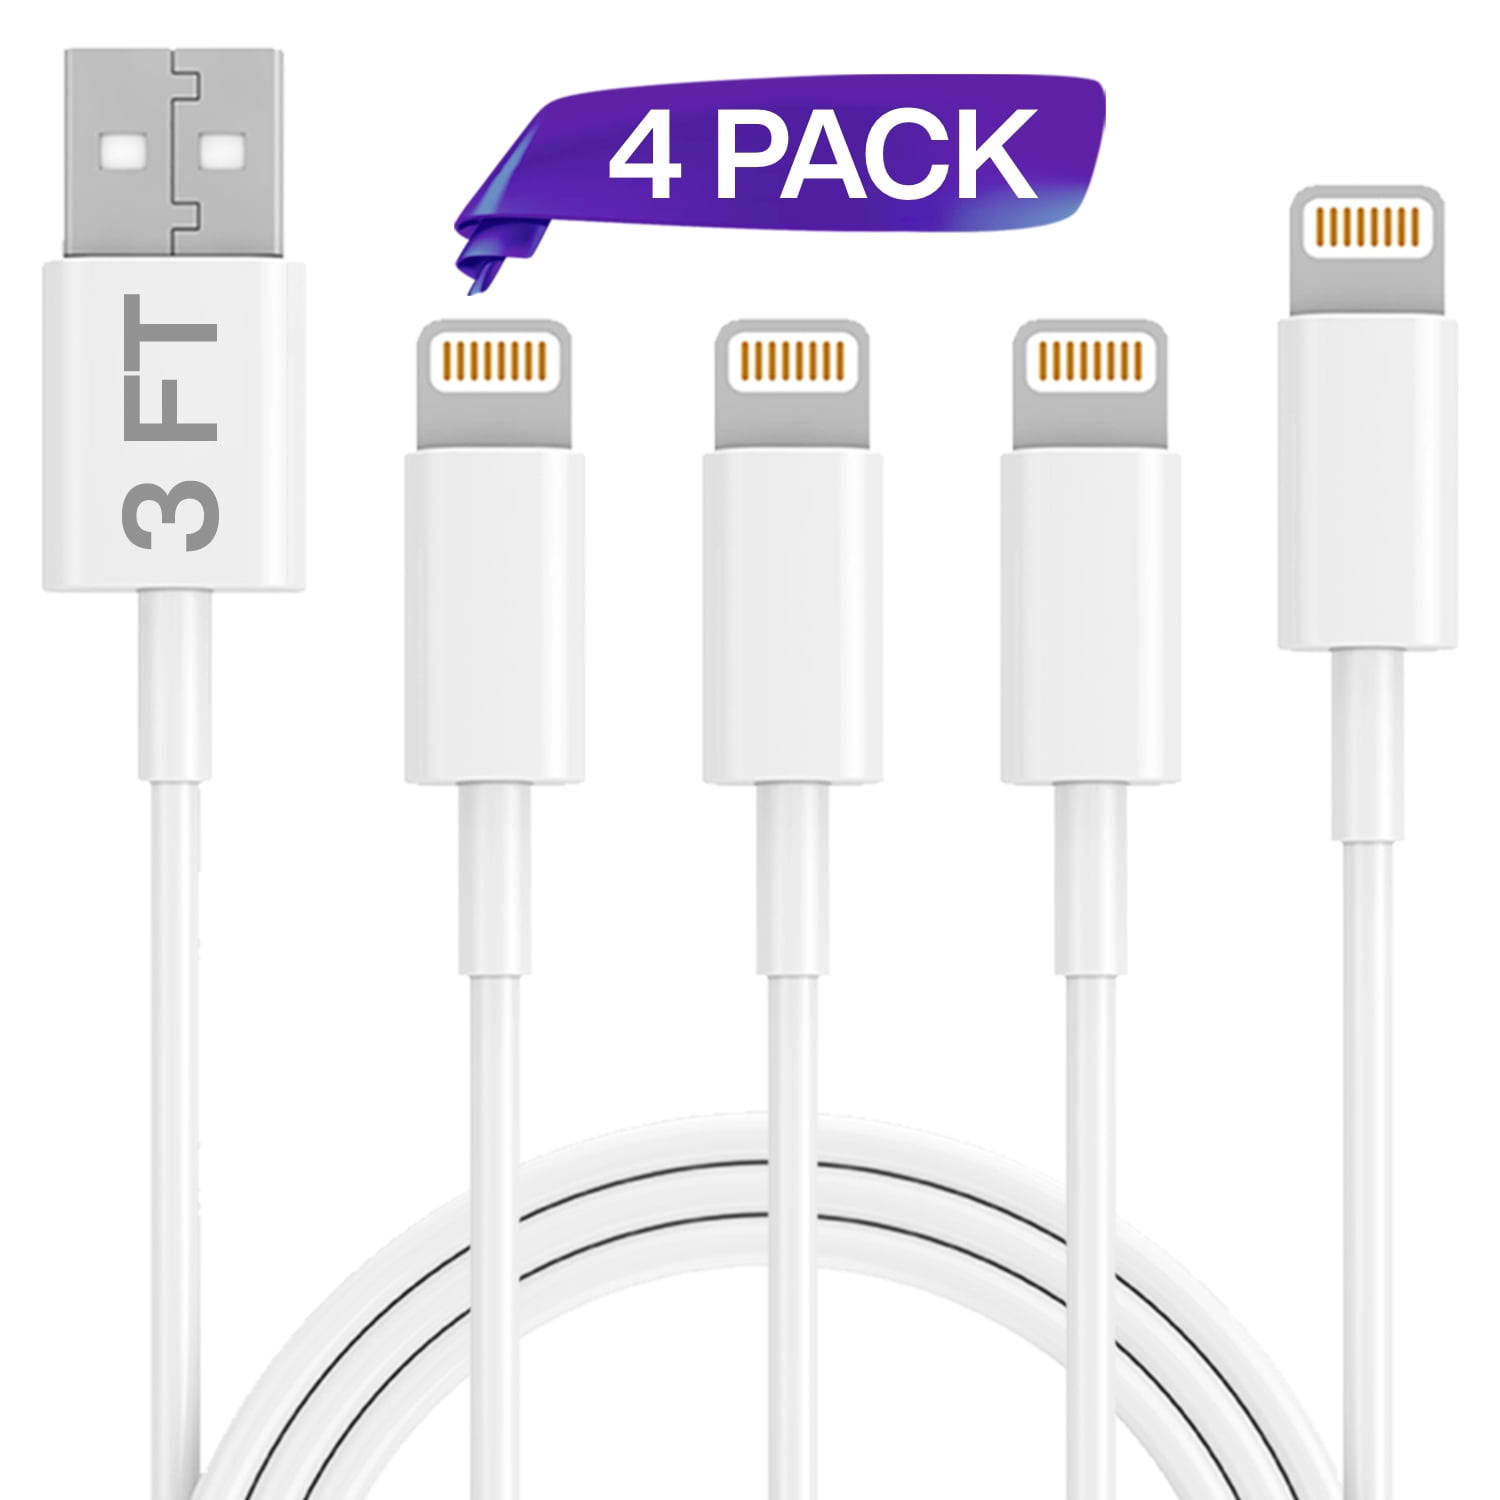 Fast Charging & Syncing Cord Compatible with iPhone 11,Pro,Pro Max,Xs,Xs Max,XR,X,8,8 Plus,7,7 Plus,6S,6S Plus,iPad Air,Mini/iPod Touch/Case Truwire iPhone Cable Set 2 Pack 3FT USB Cable 